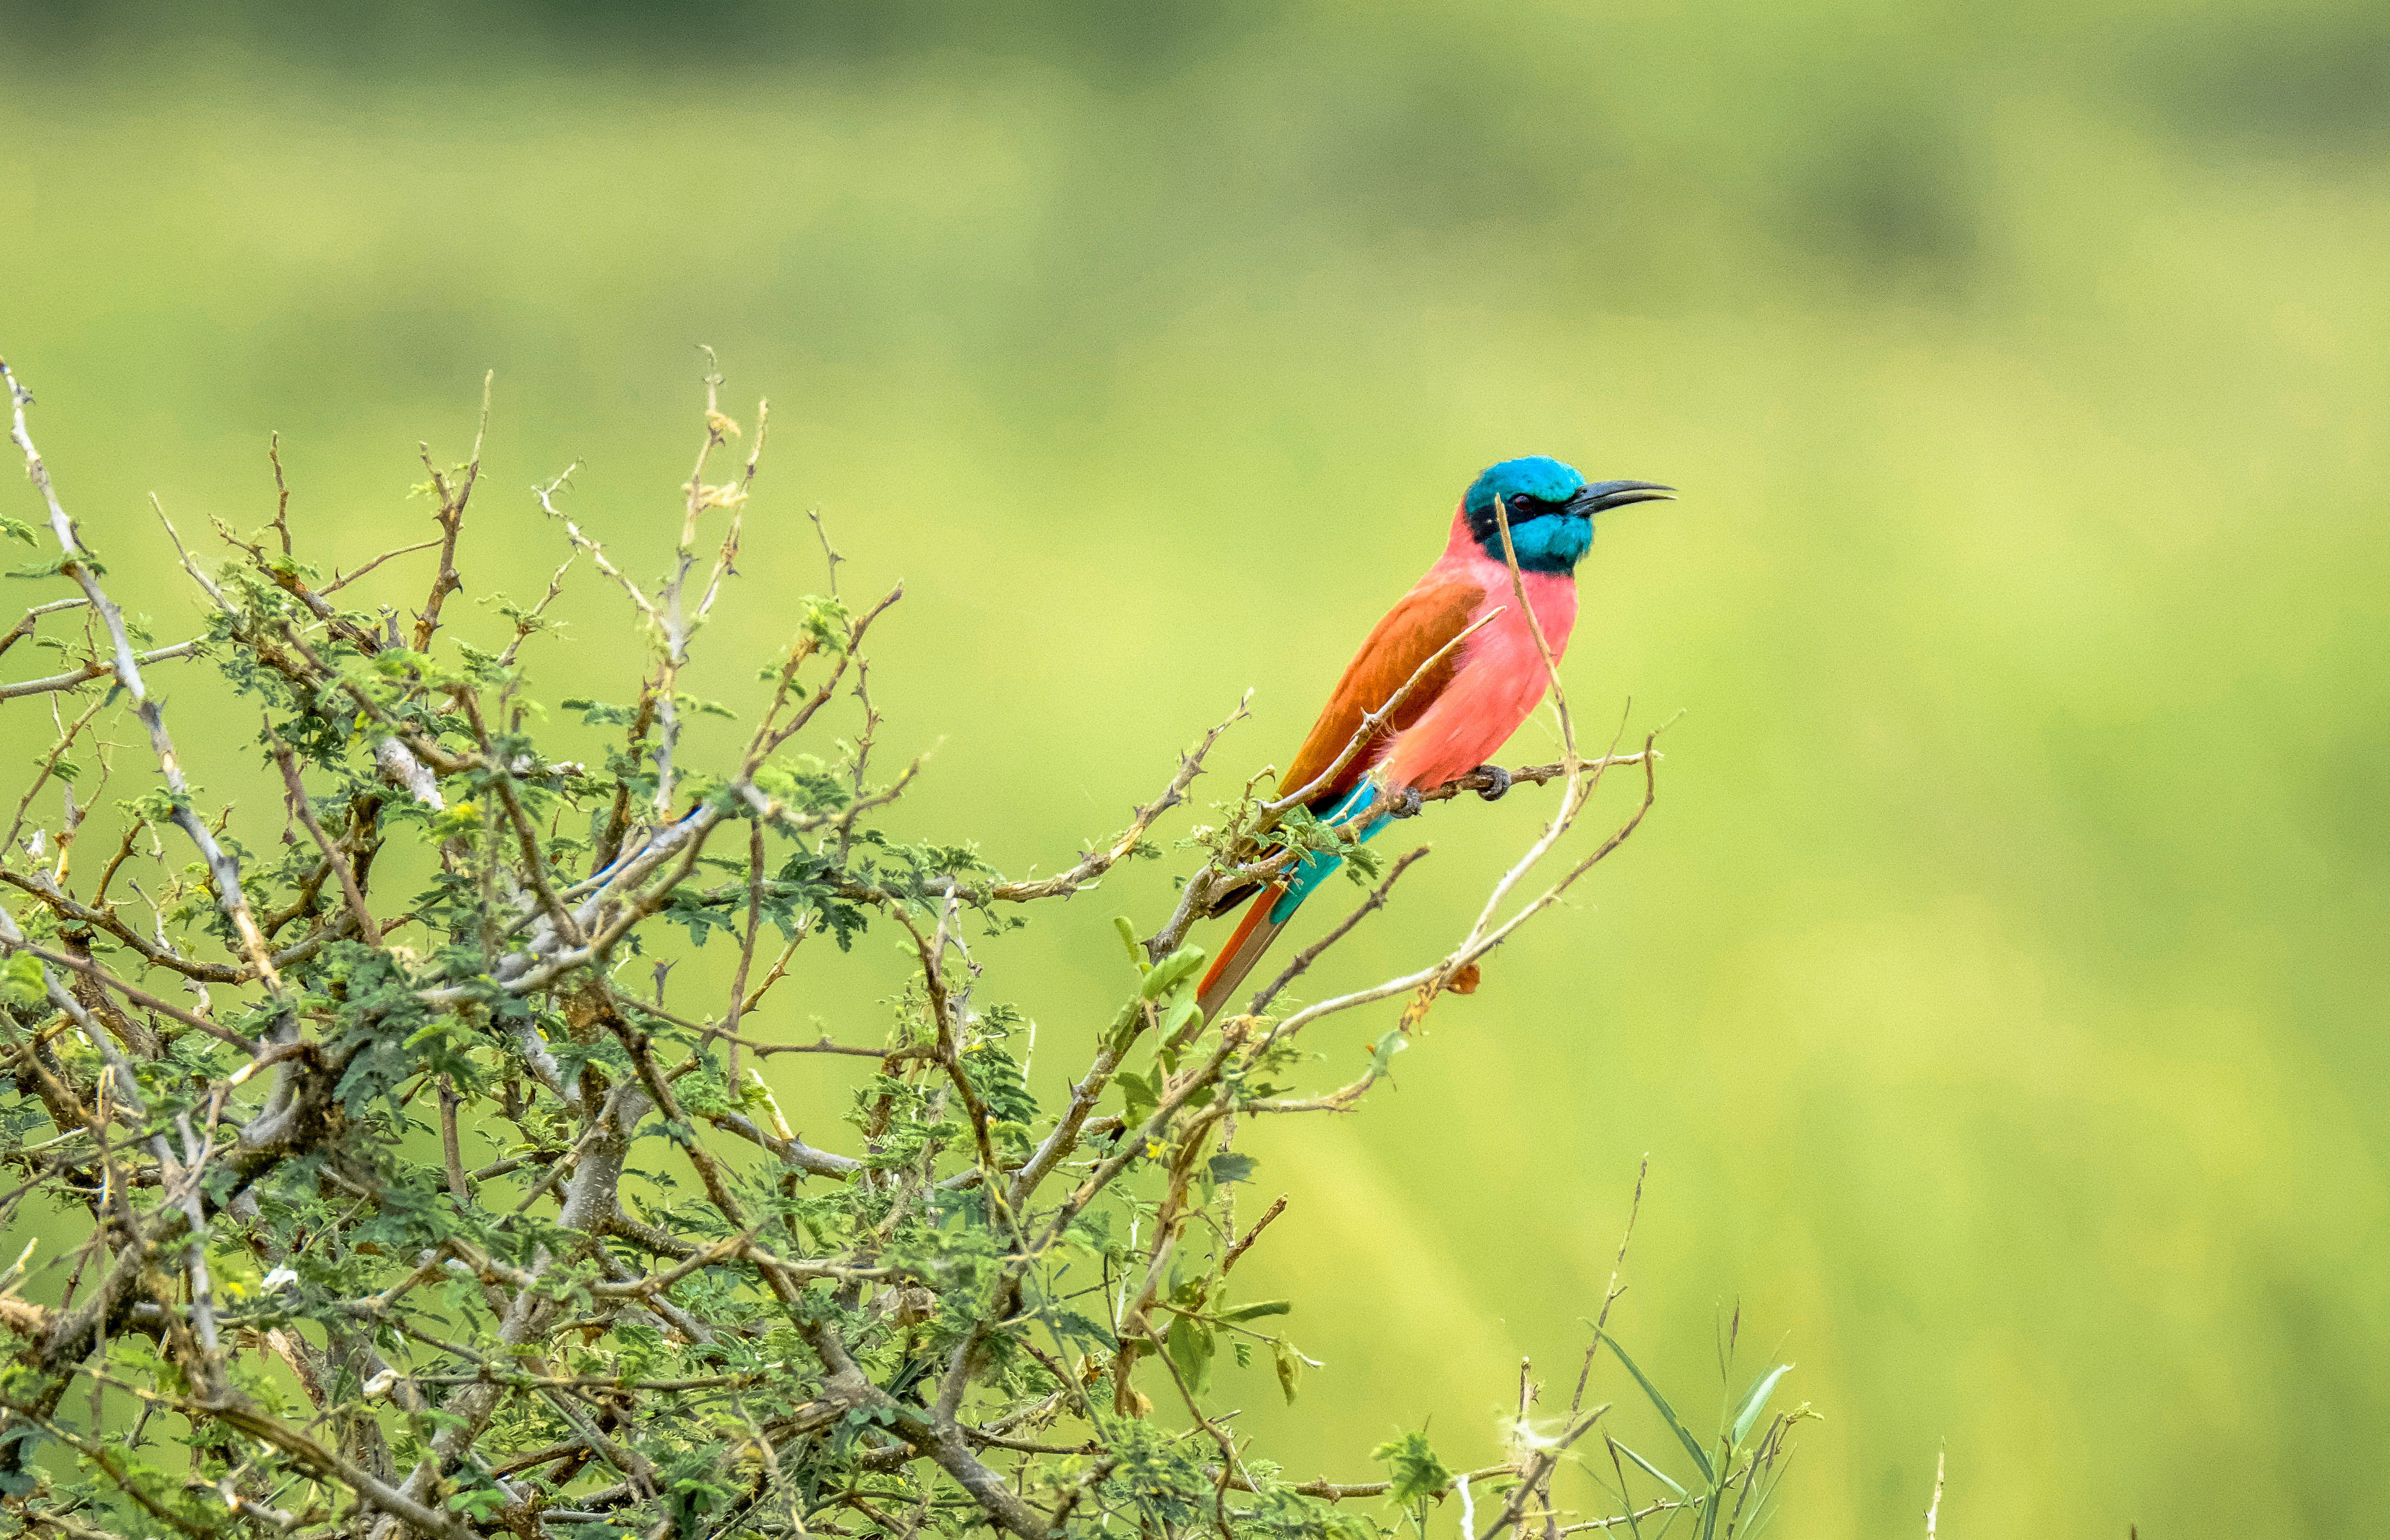 A Carmine Bee Eater bird spotted in Botswana